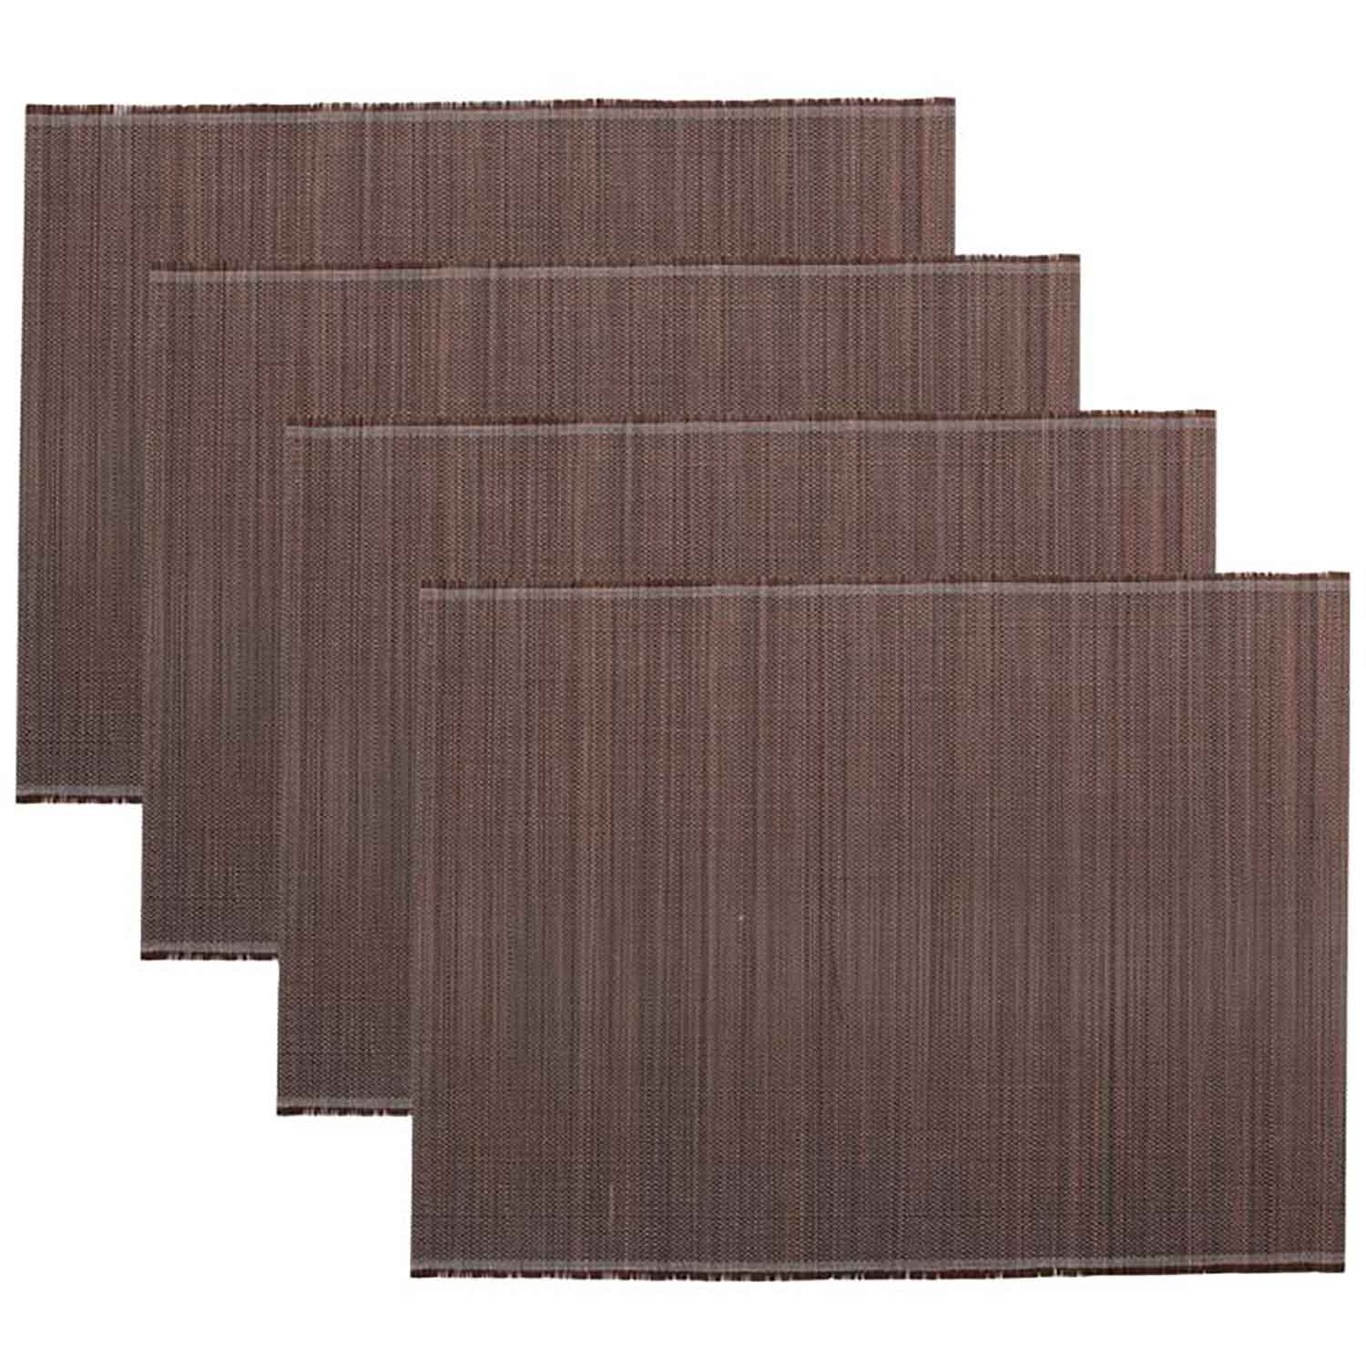 Bamb Placemats 4-pack, Light Brown